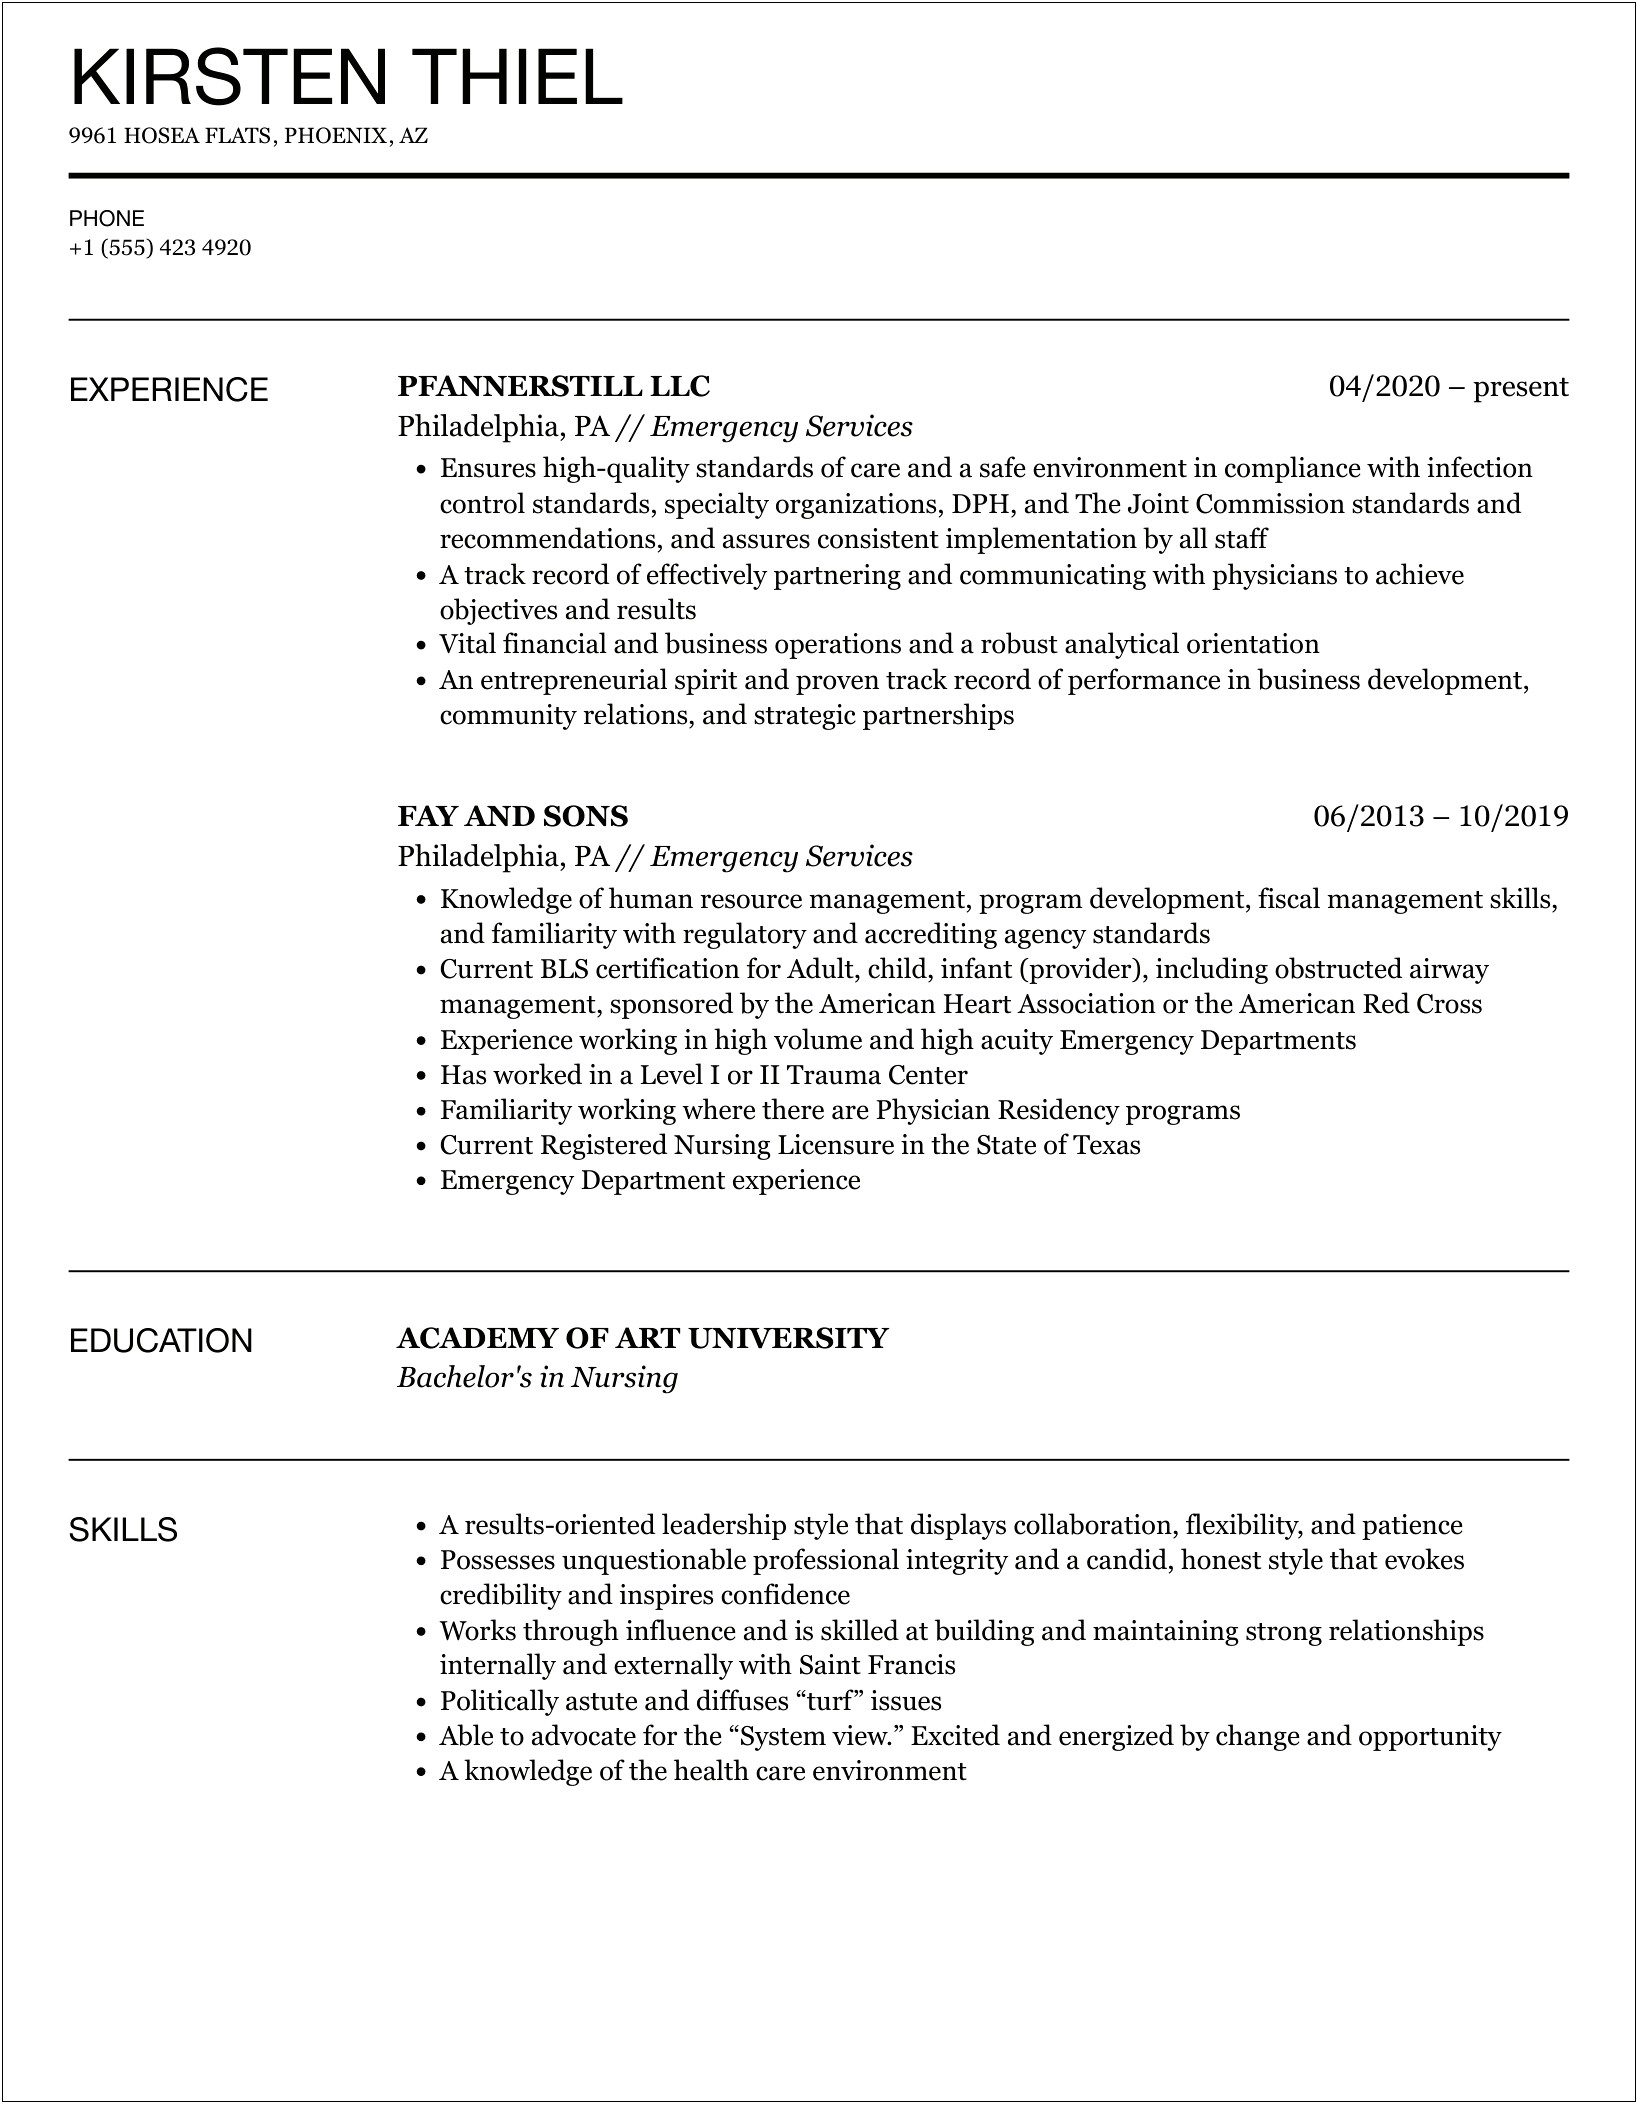 Transferable Skills Resume Examples Public Safety Emergency Professionals